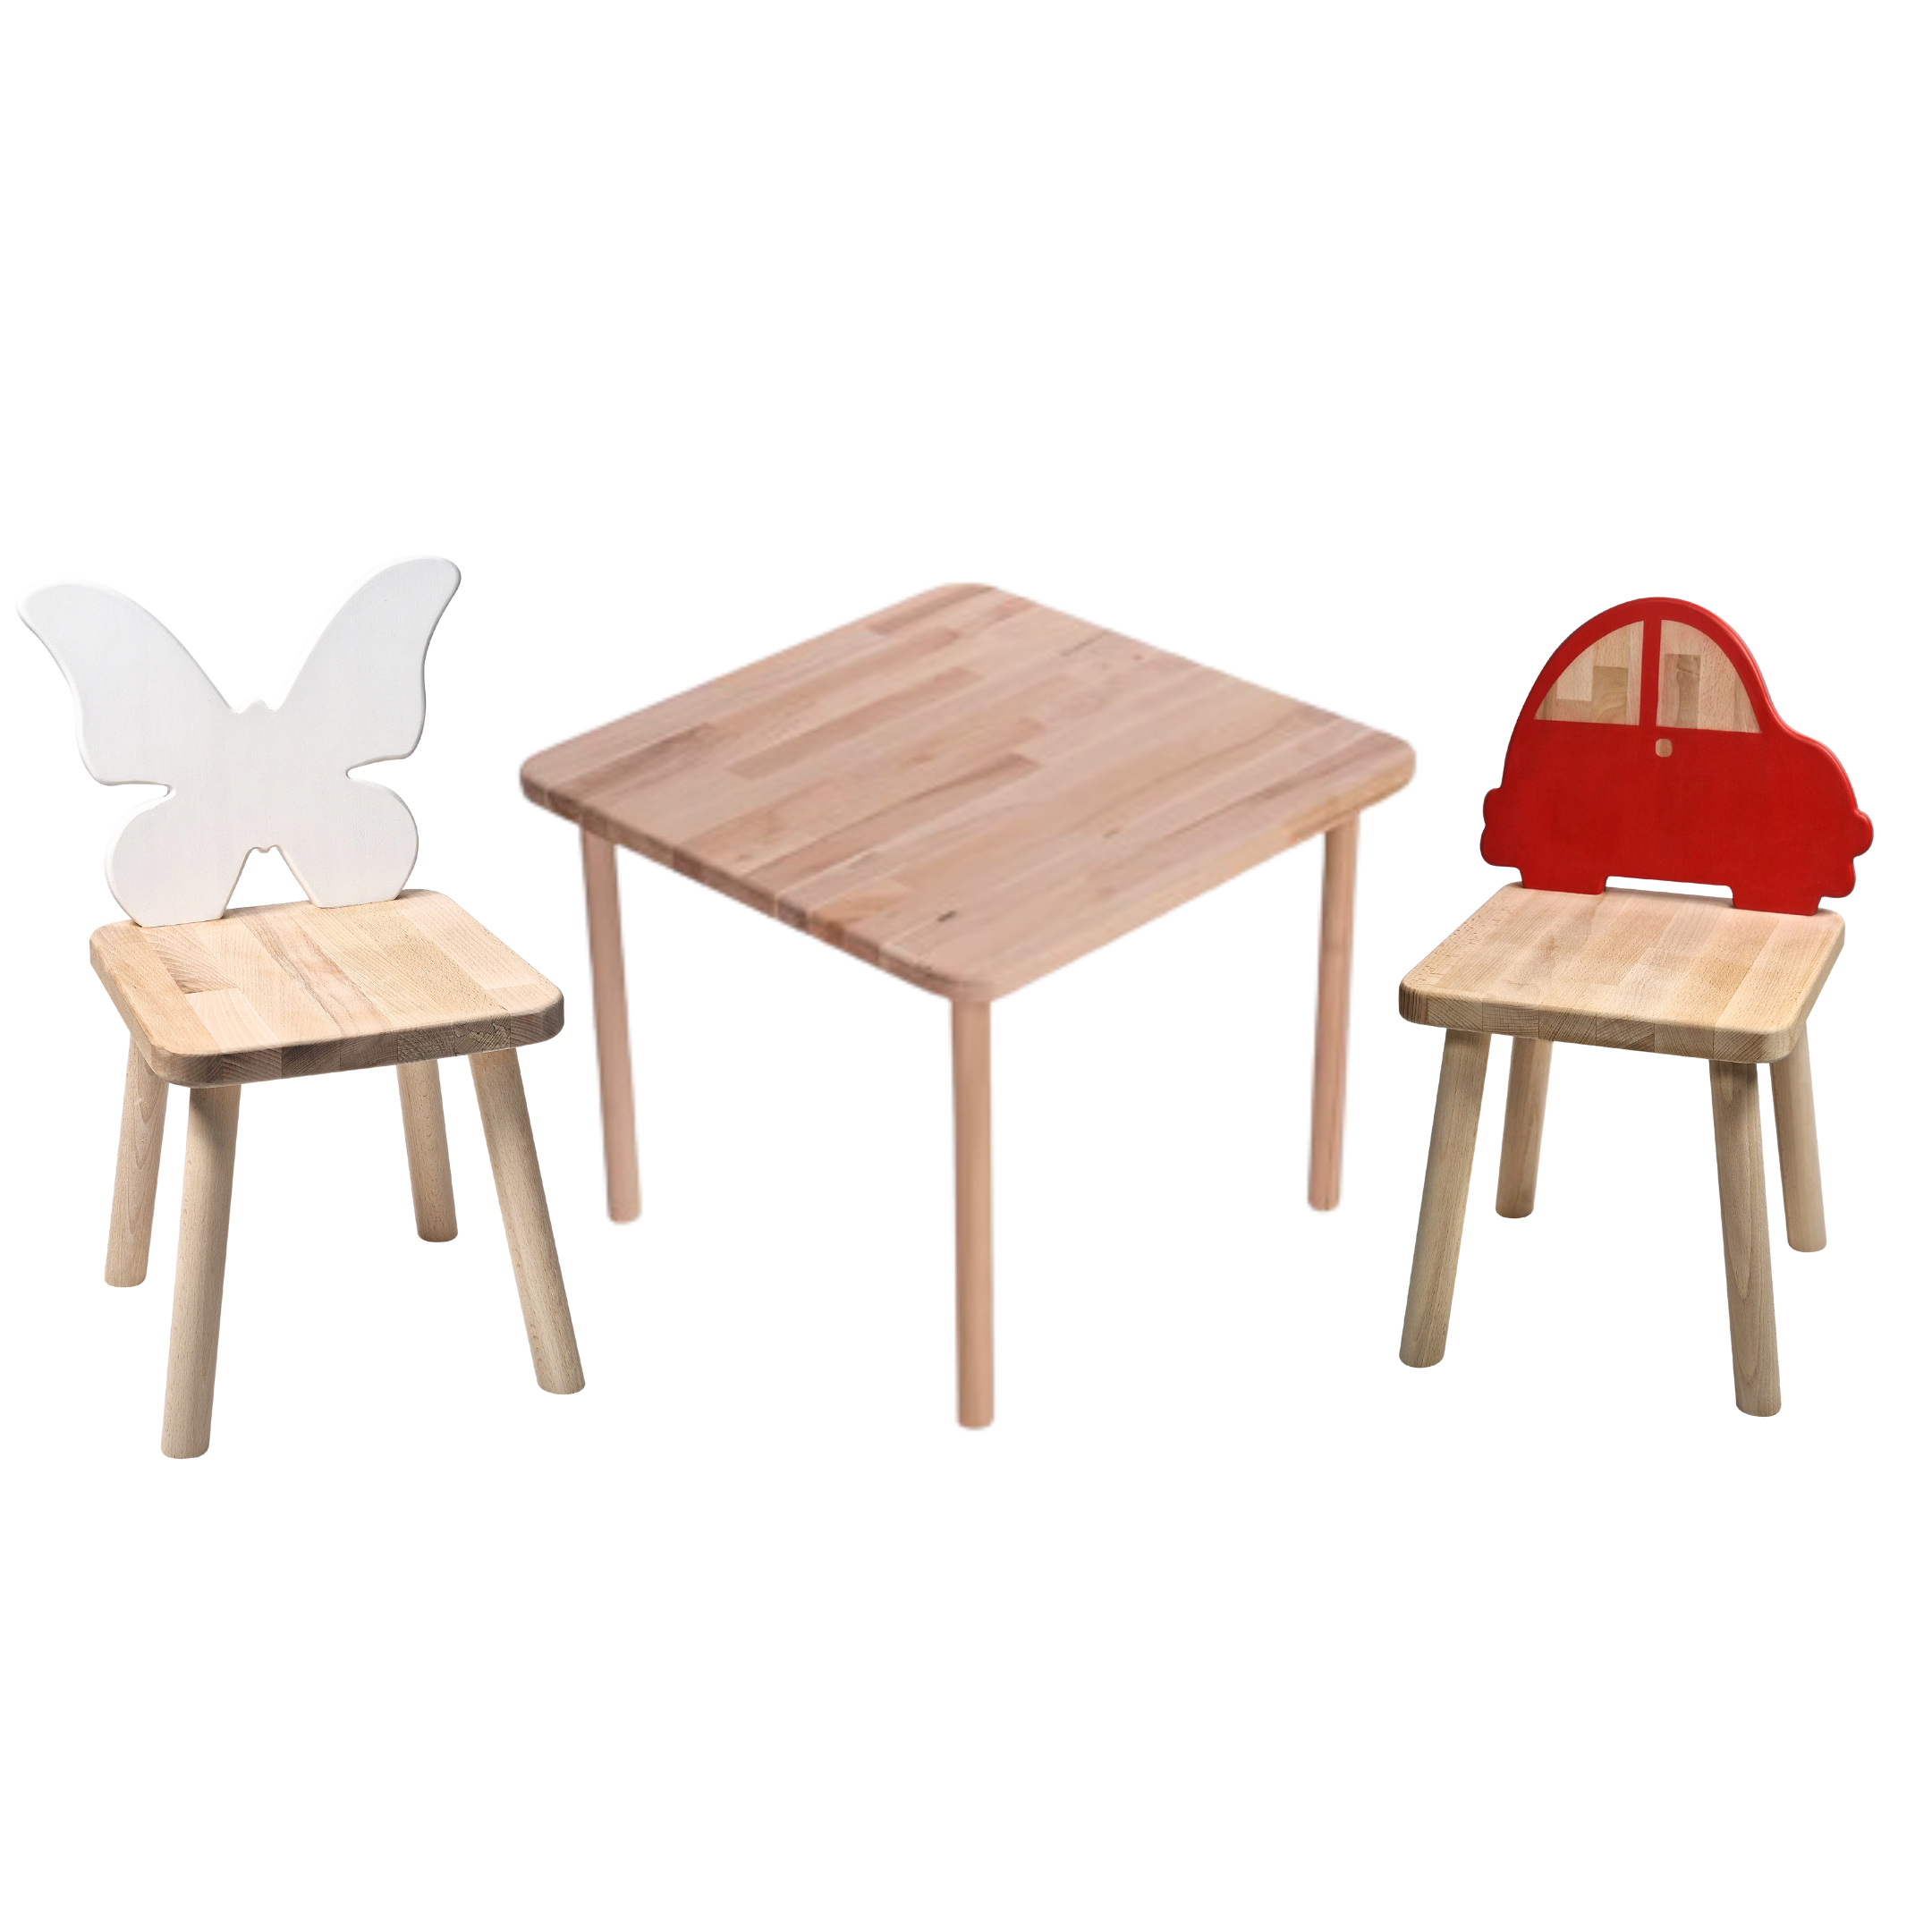 Toddler Chair and Table Set